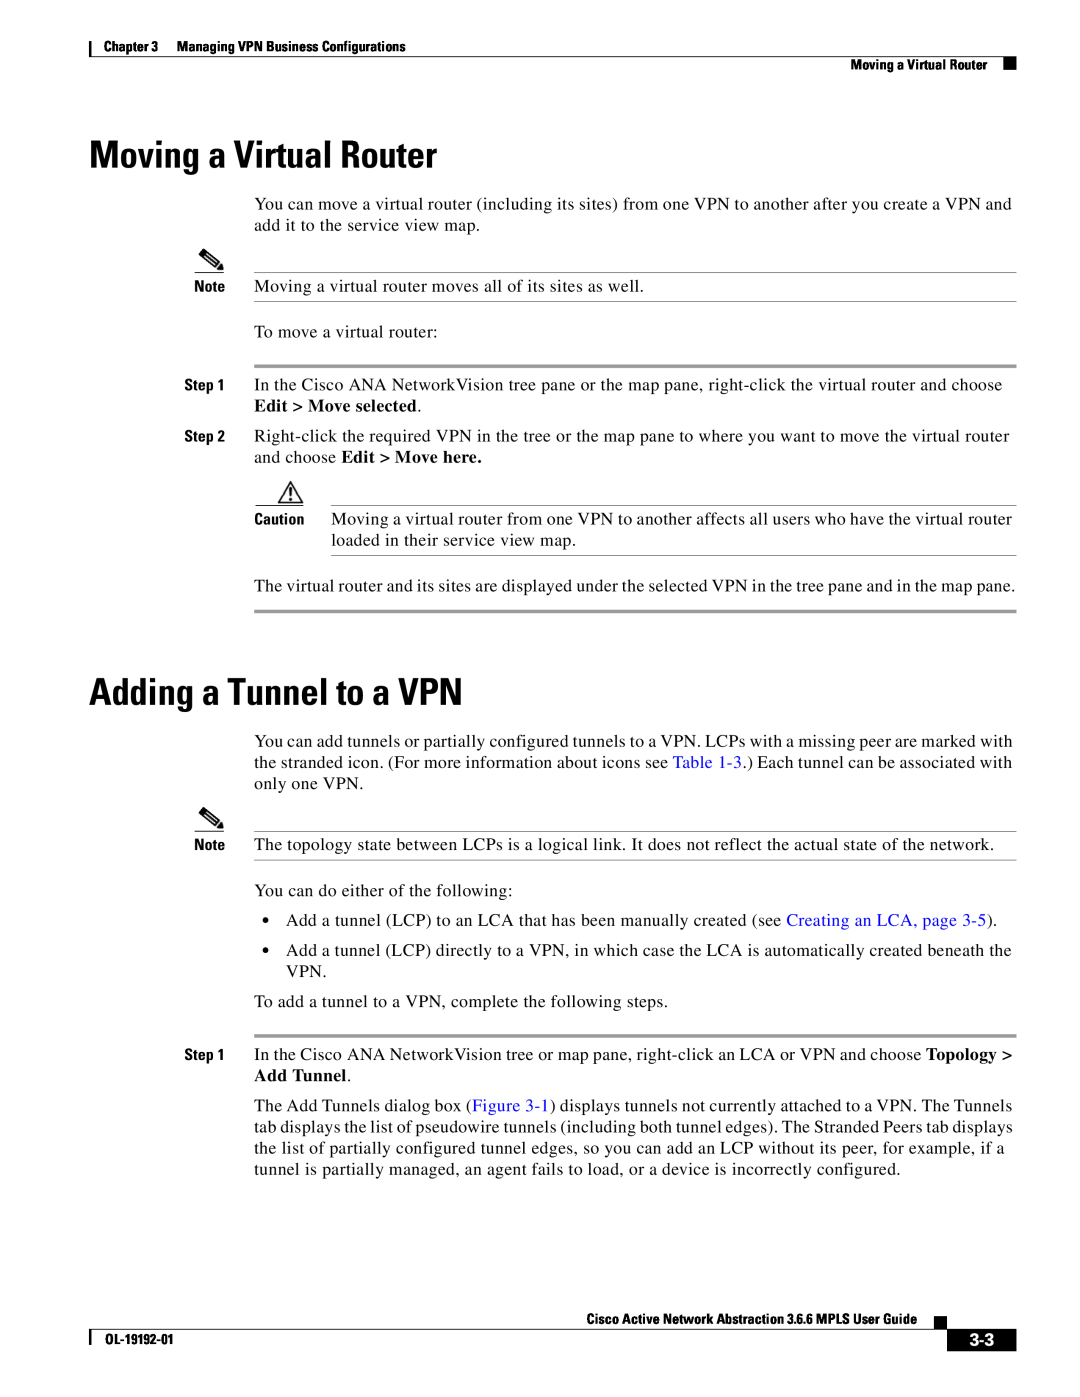 Cisco Systems 3.6.6 manual Moving a Virtual Router, Adding a Tunnel to a VPN 